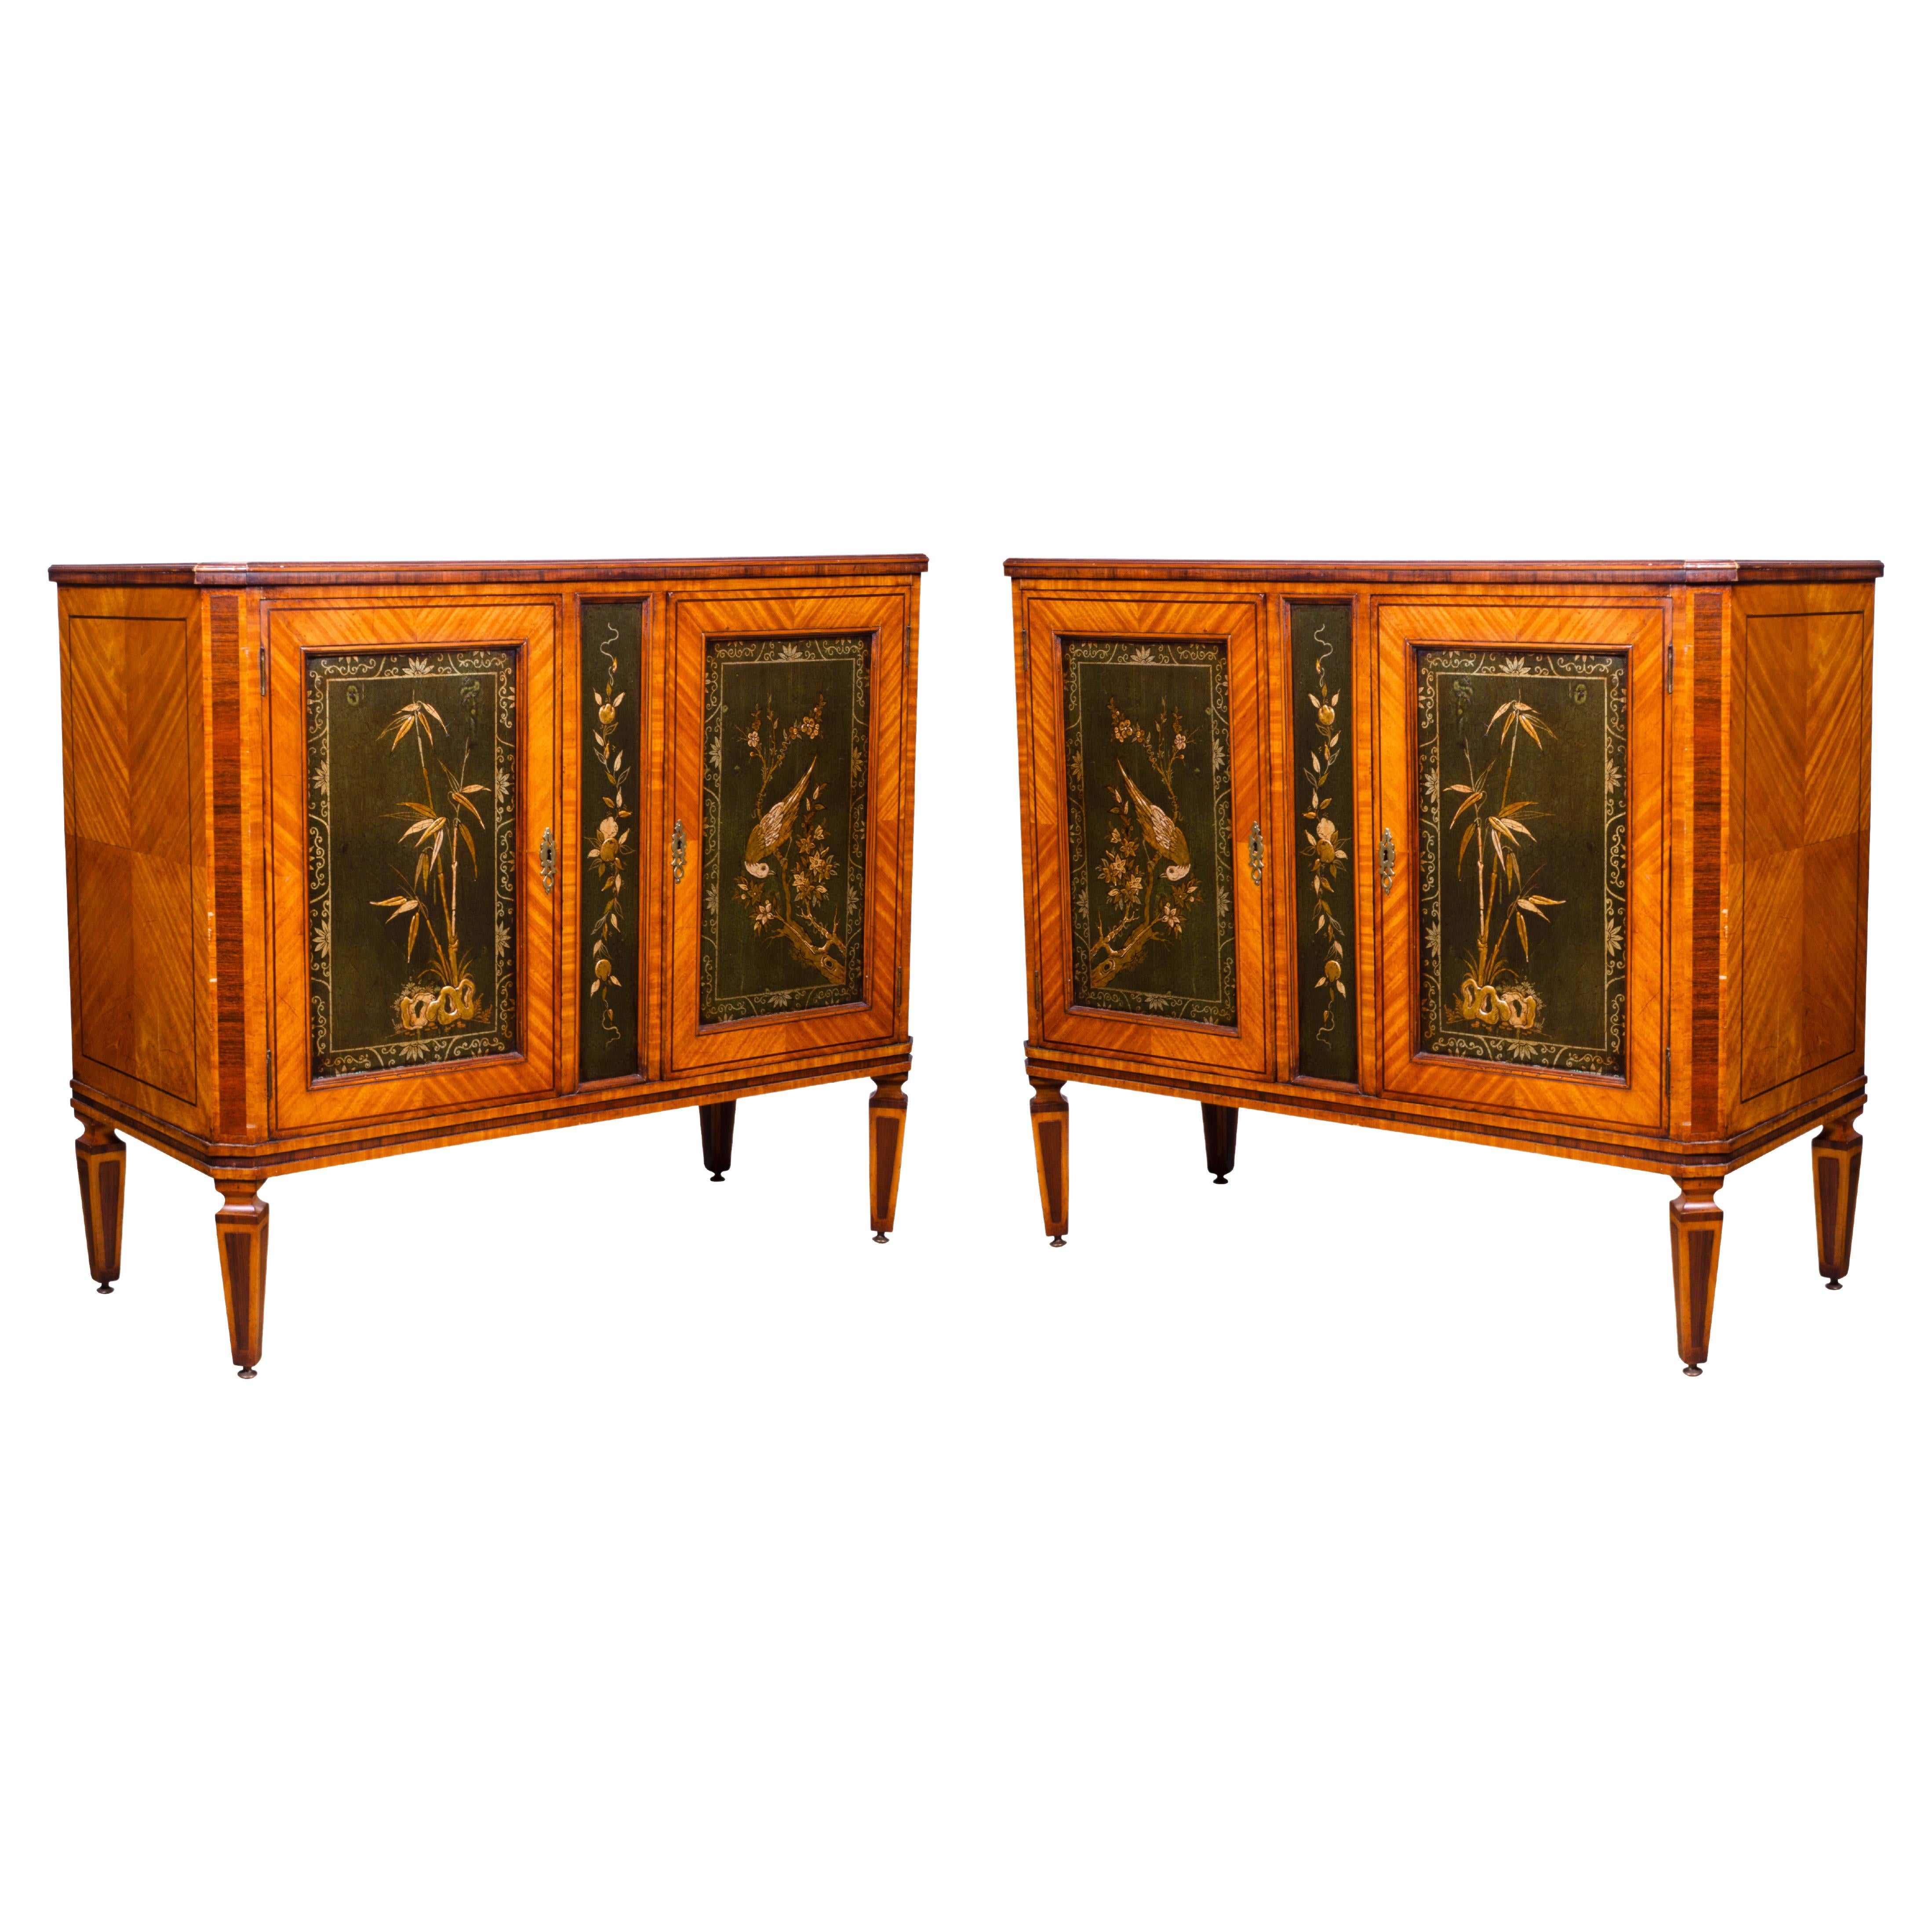 Pair of Dutch Neoclassic Satinwood and Japanned Cabinets